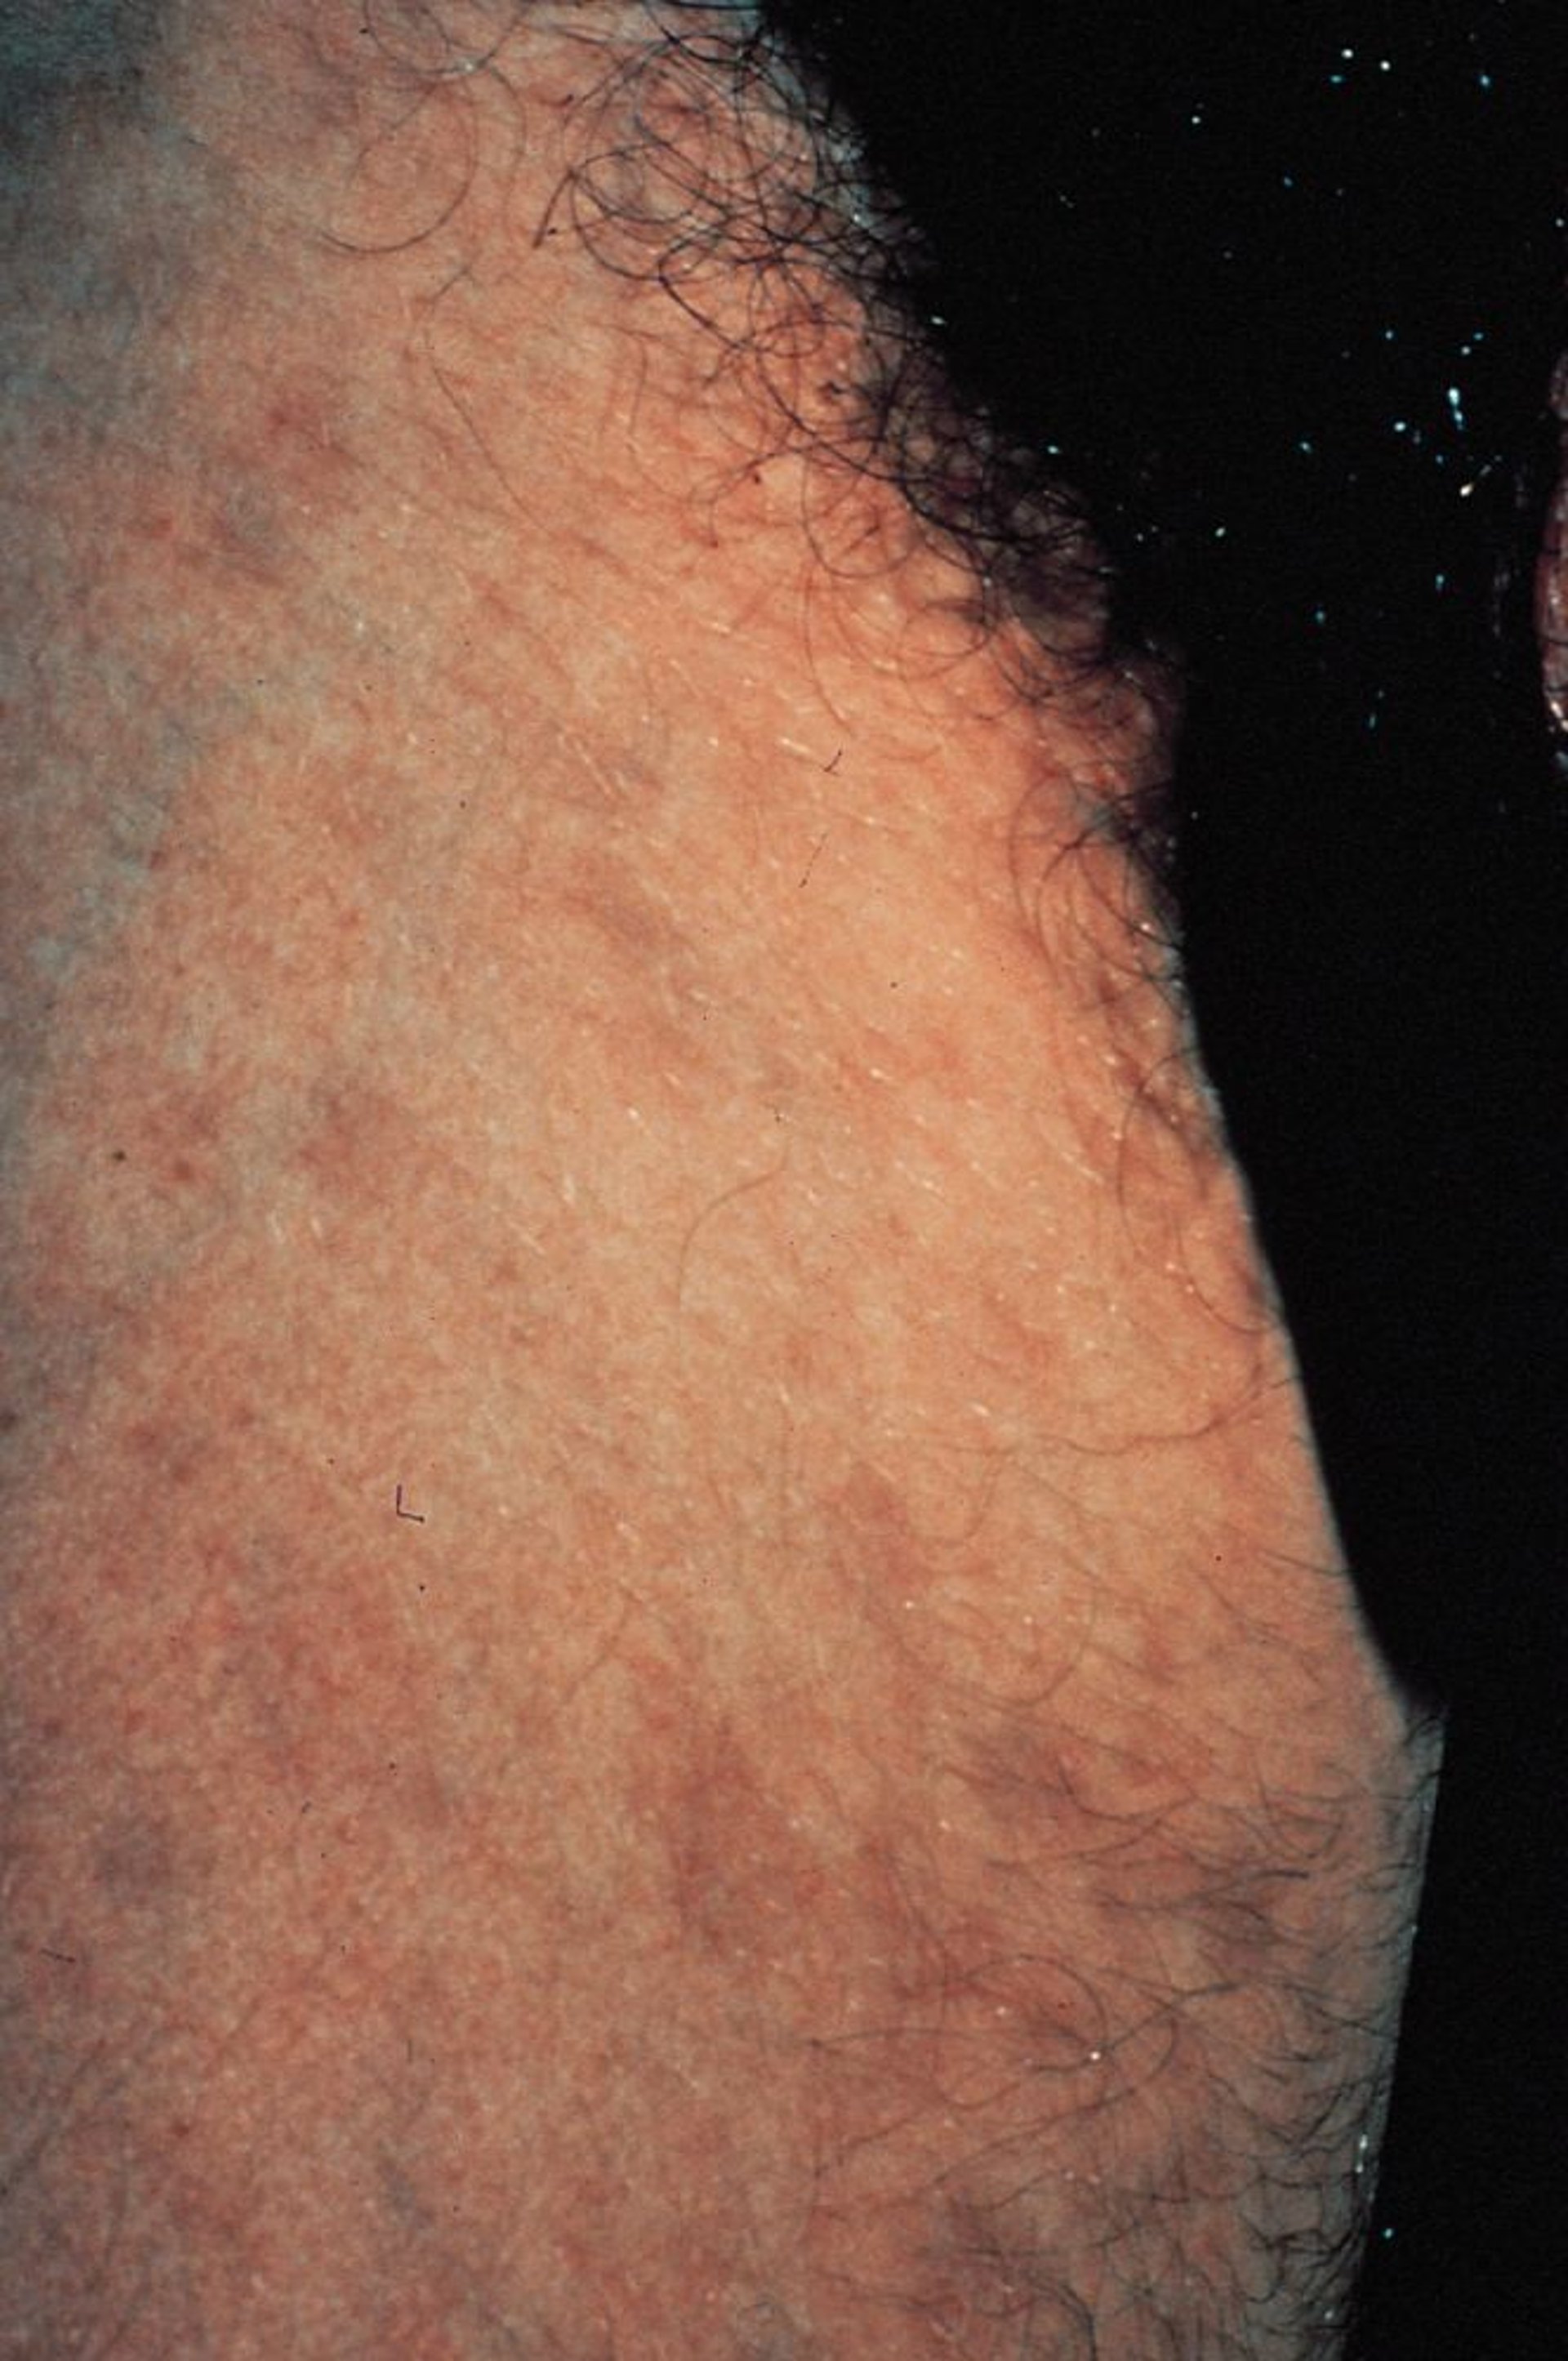 Bluish Gray Spots Caused by Pubic Lice Bites